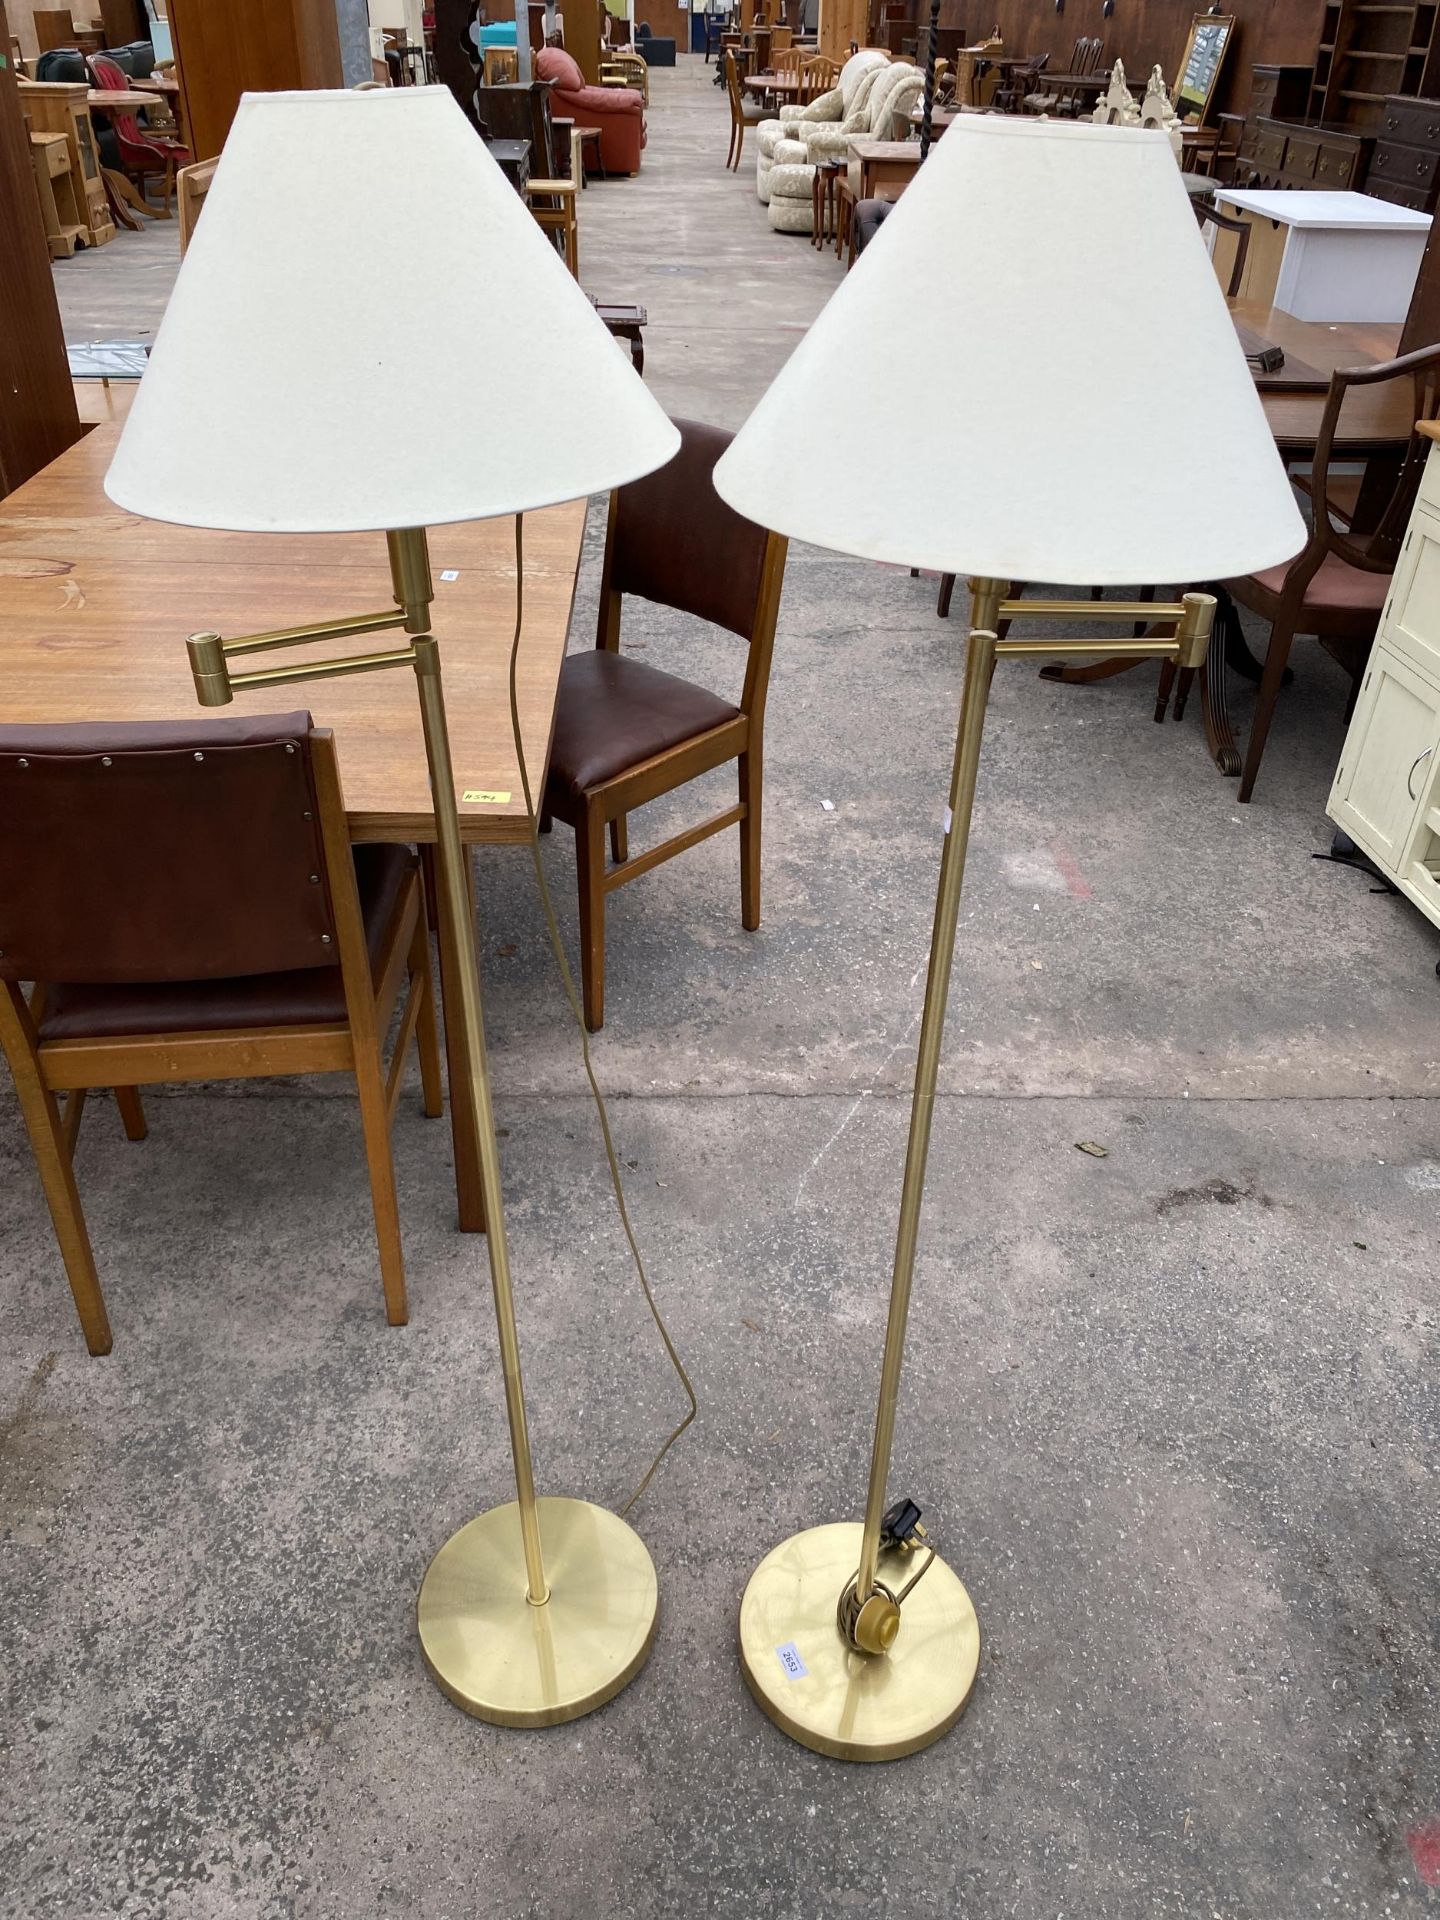 A PAIR OF BRASS FRANKLITE FLOOR LAMPS COMPLETE WITH SHADES